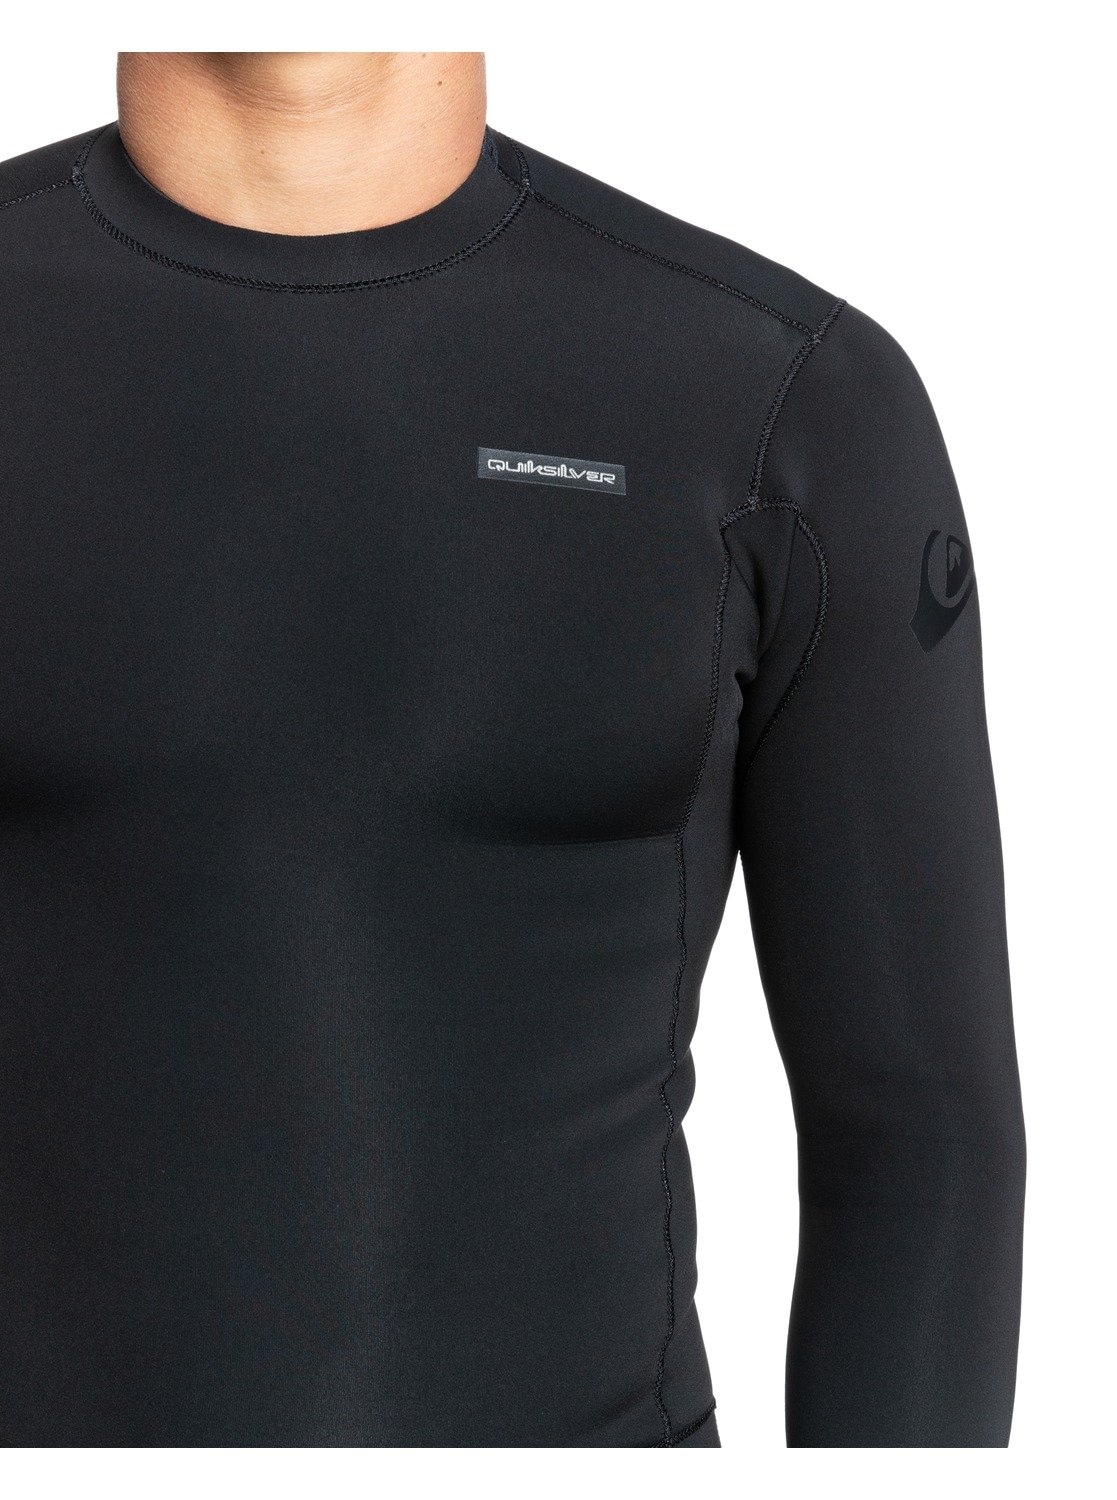 Neoprenanzug Quiksilver Sessions« »2mm ♕ Everyday bei